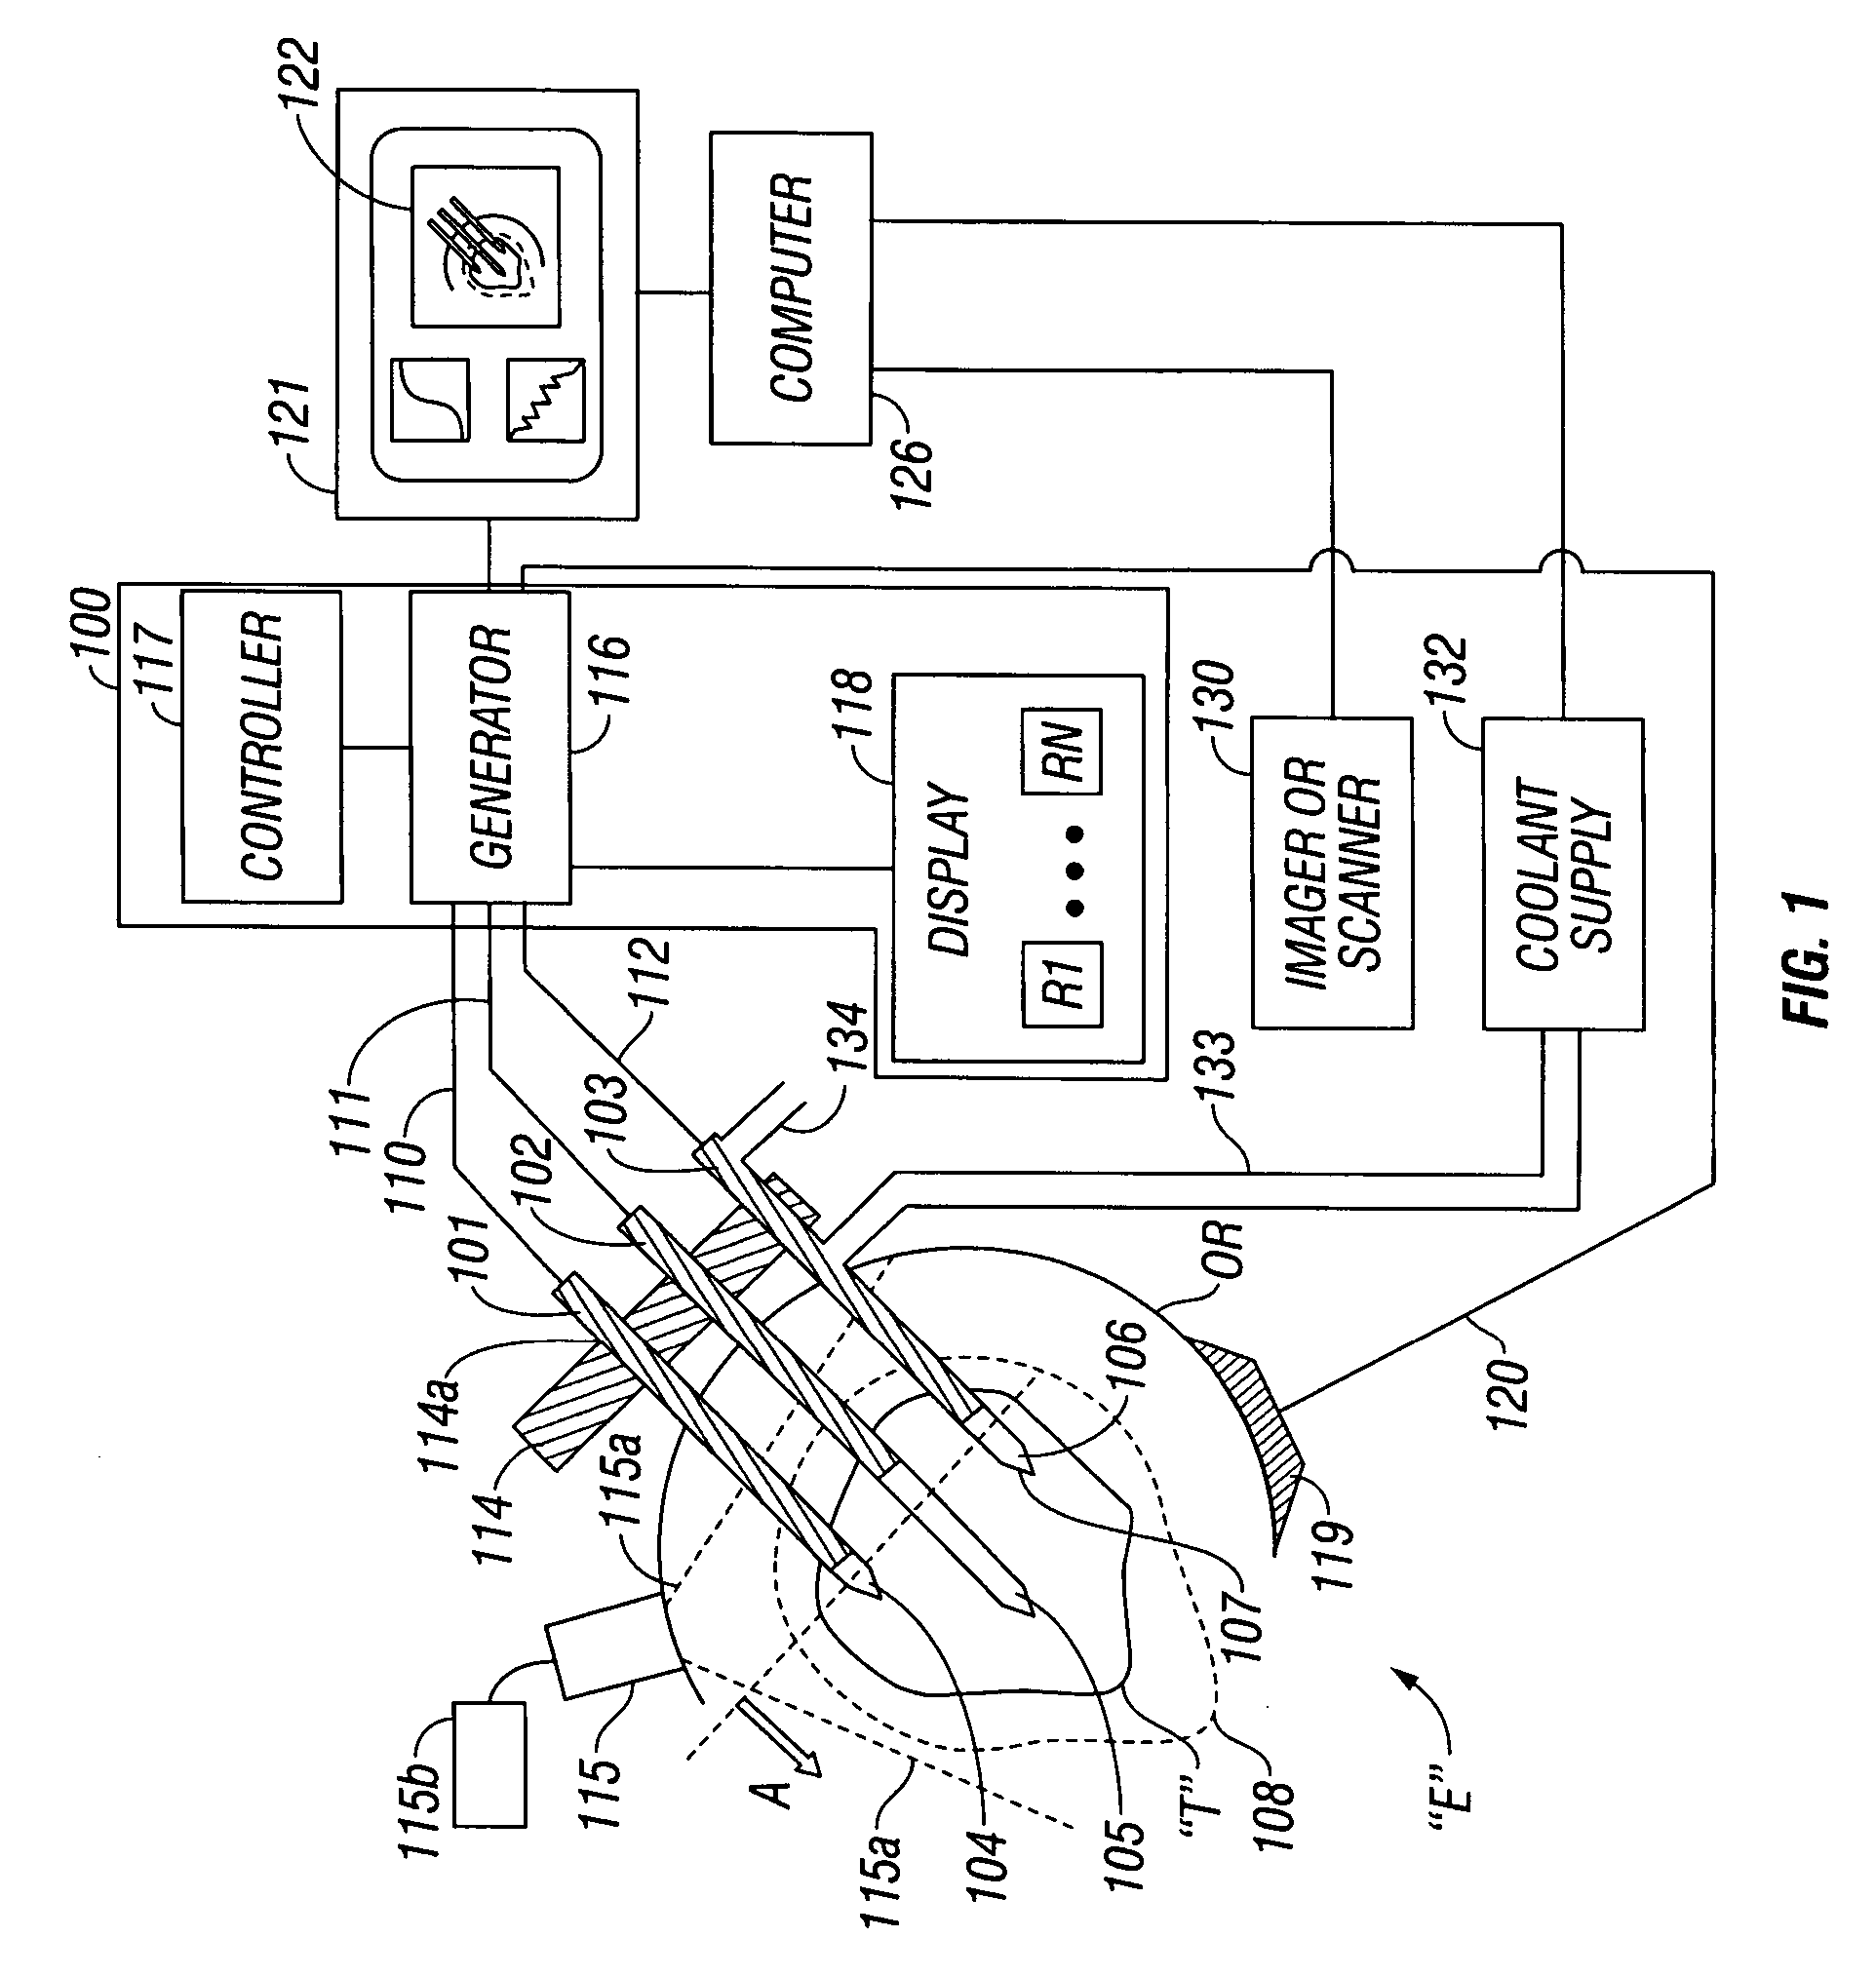 Electrosurgical system employing multiple electrodes and method thereof